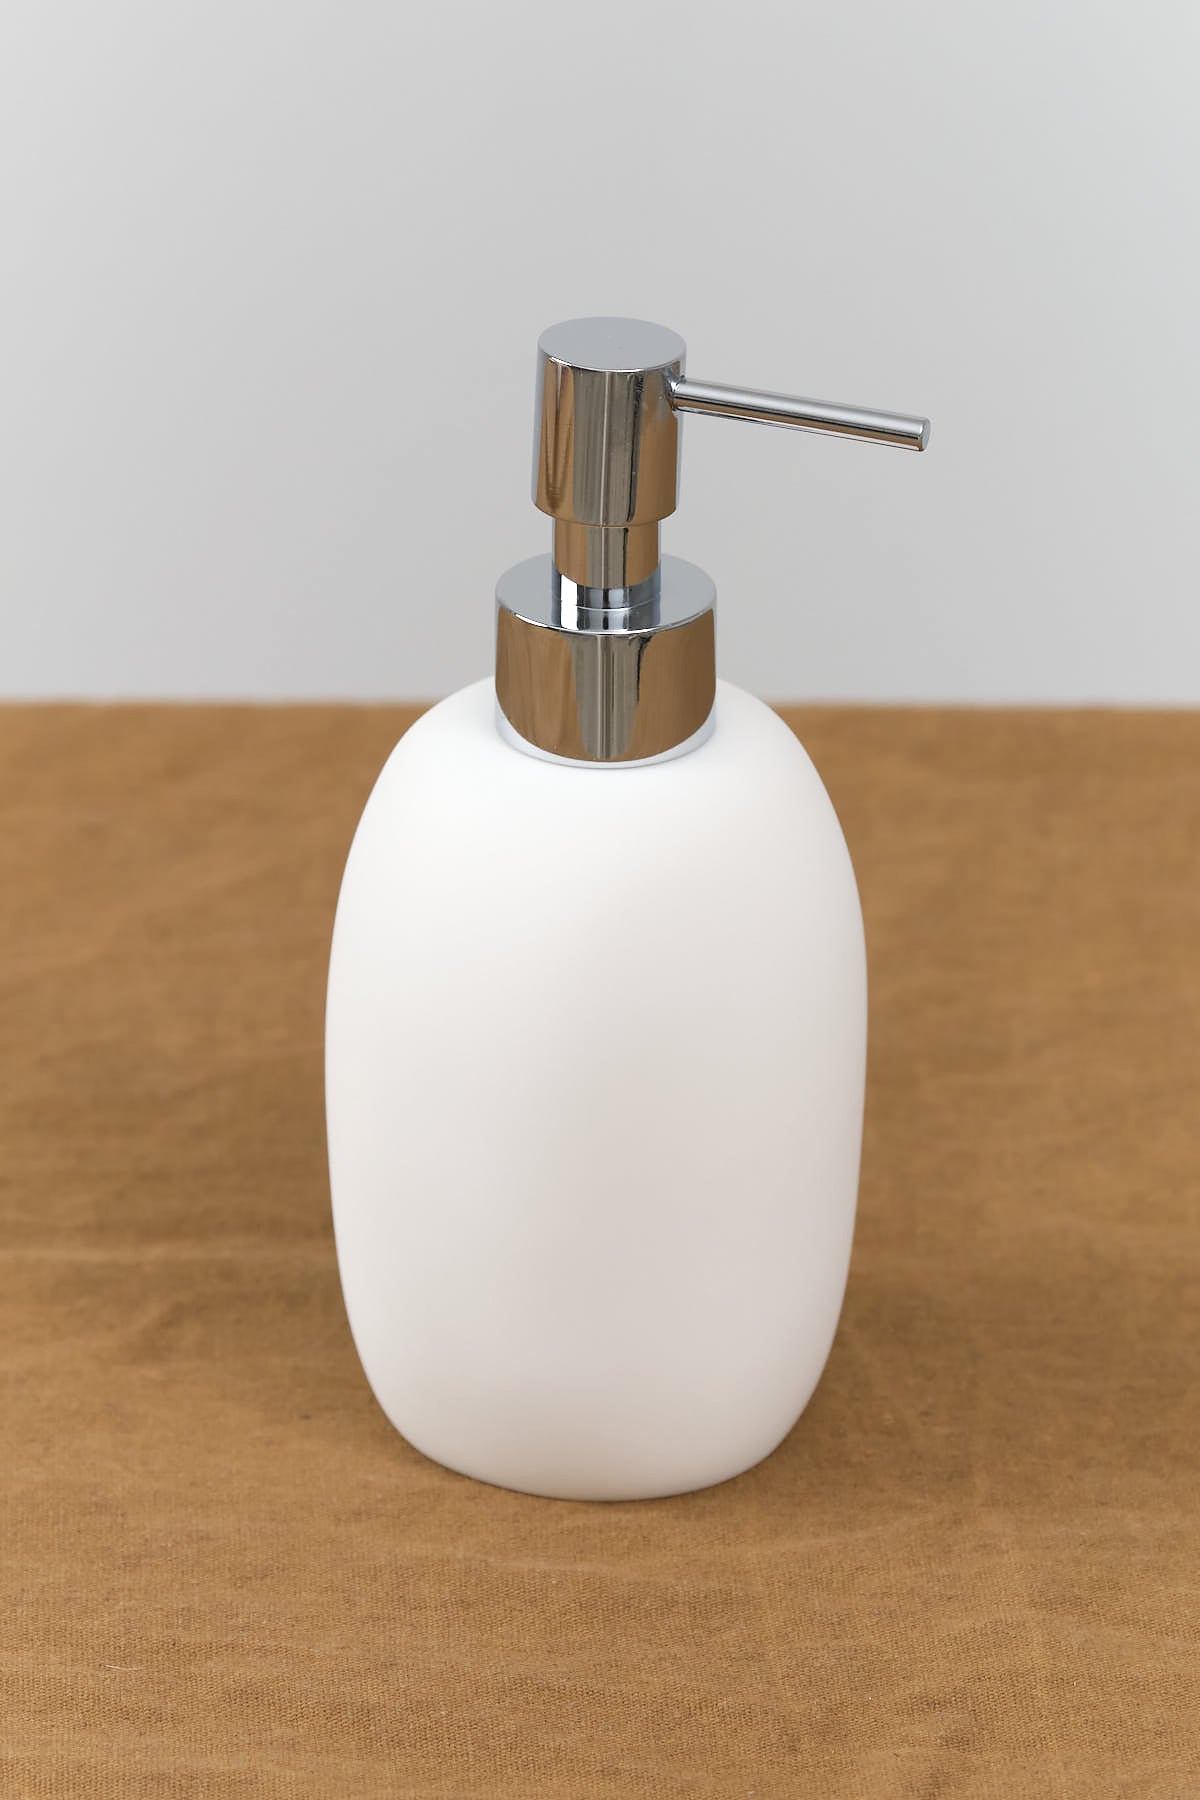 Angled view of Soap Dispenser